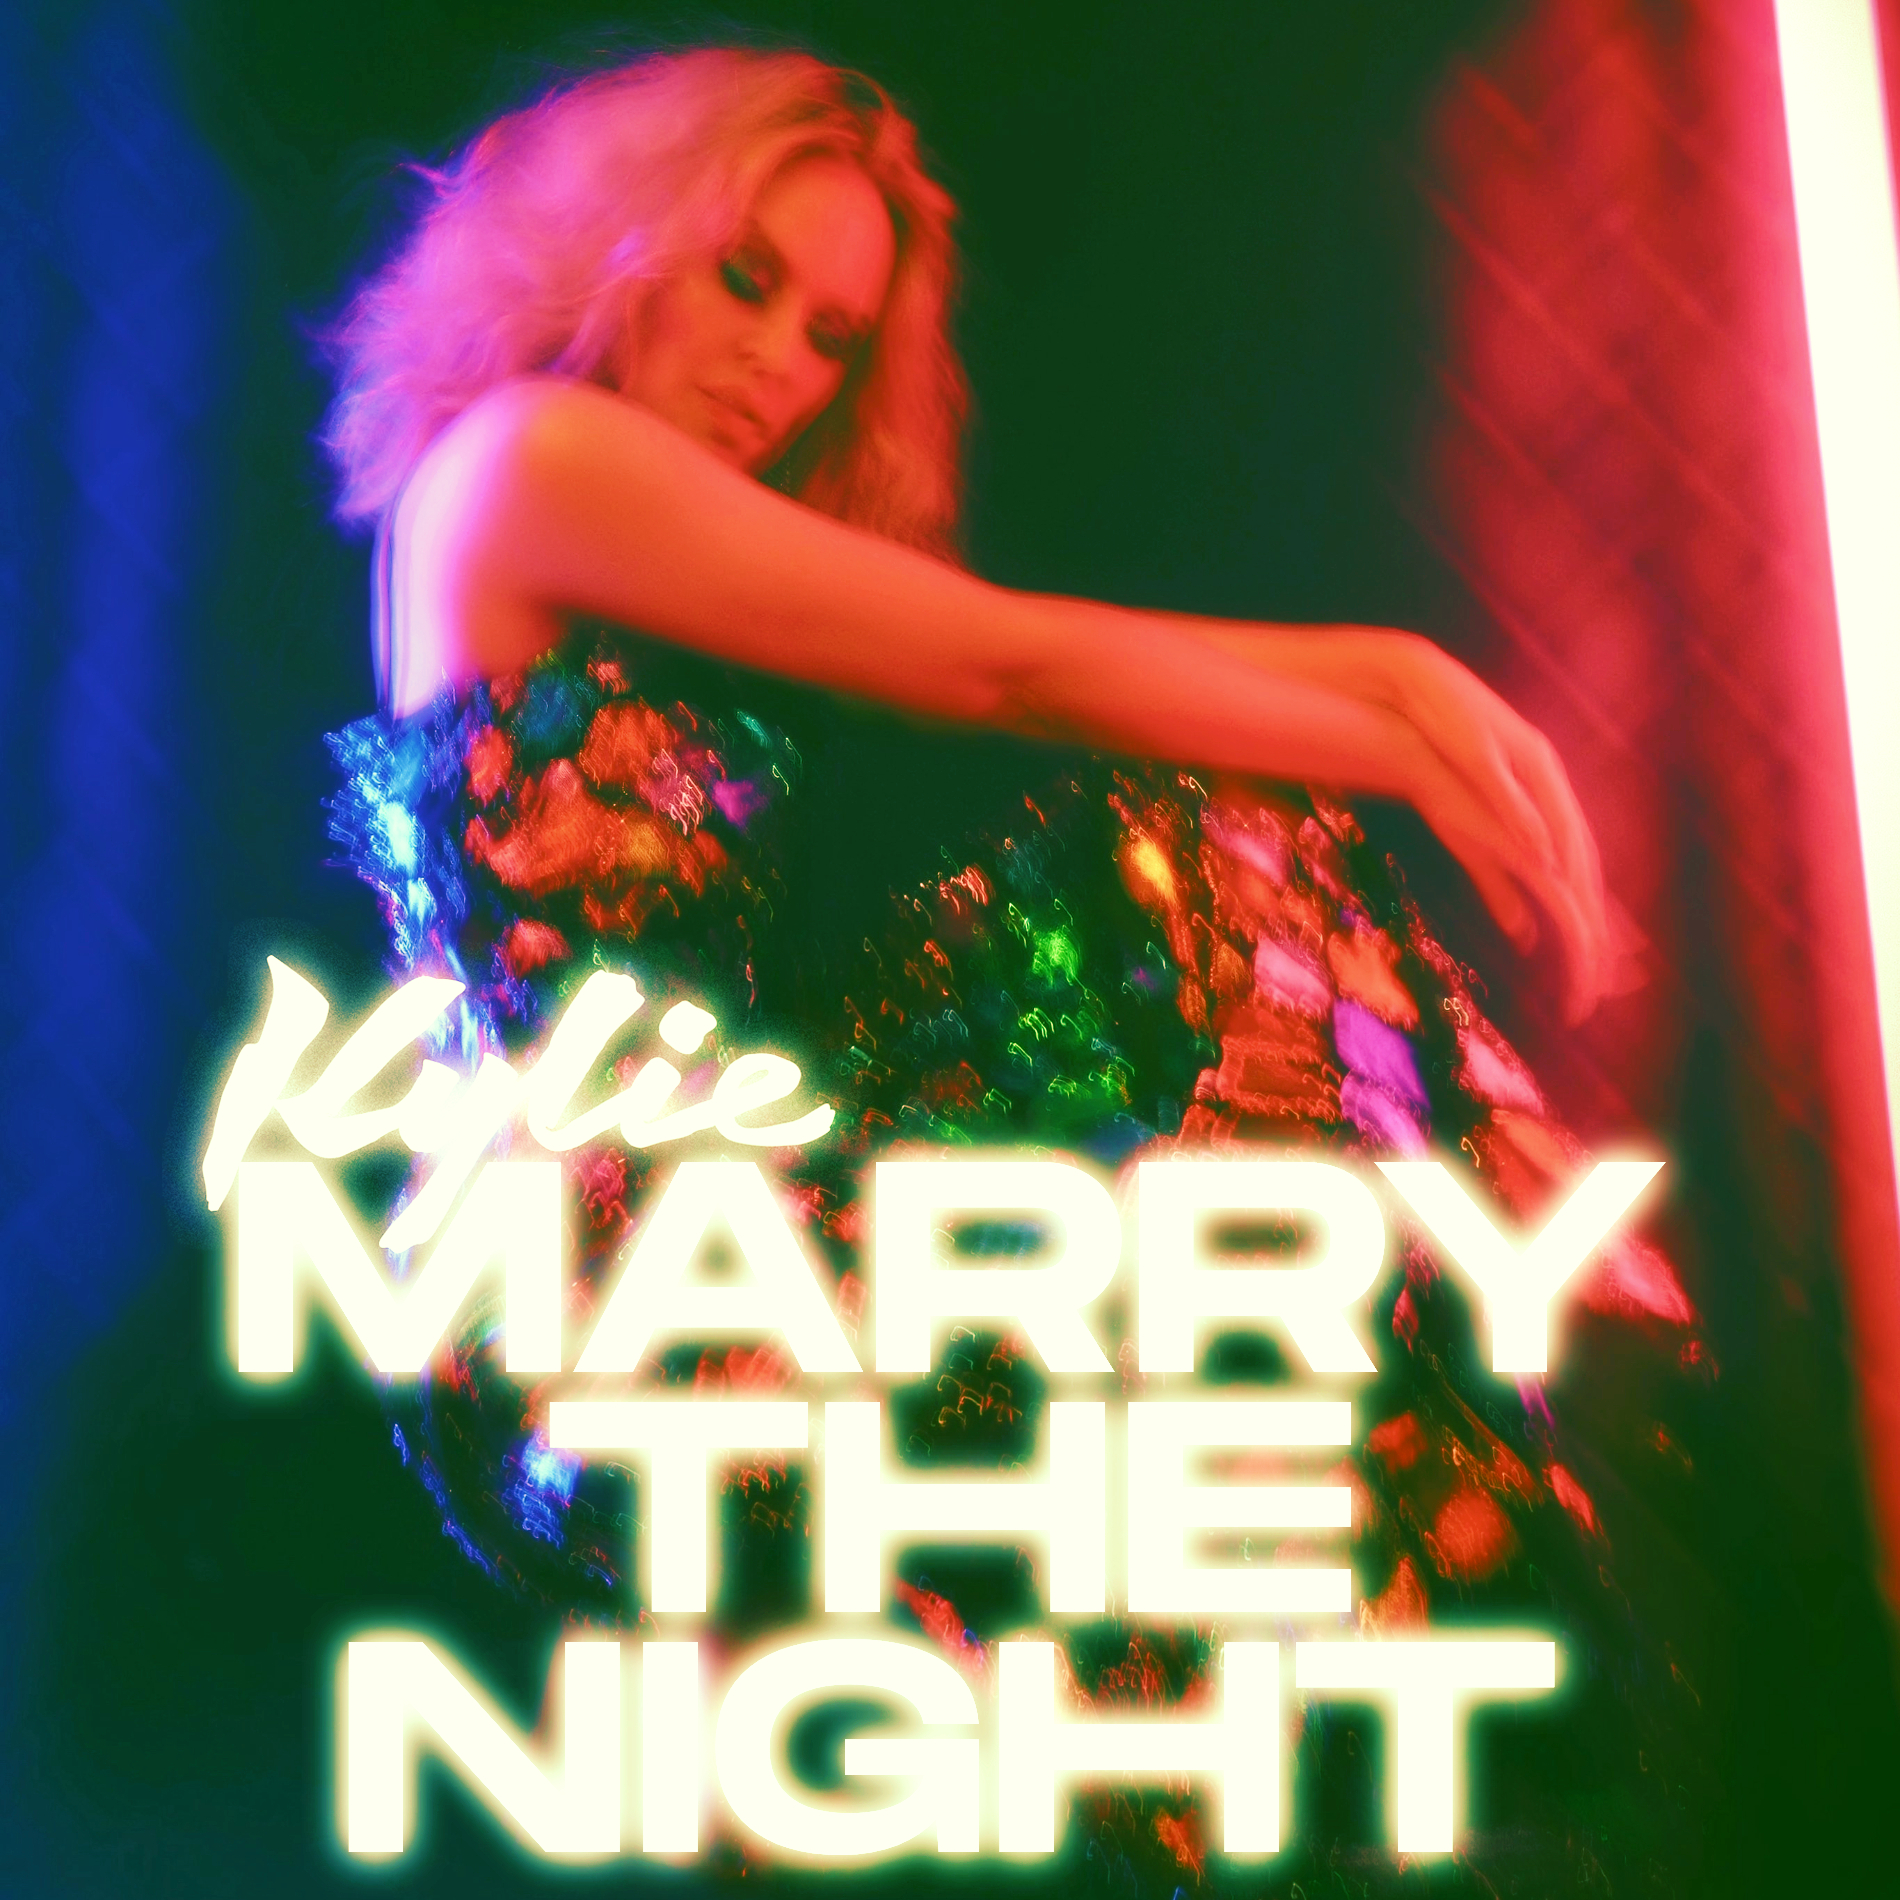 Marry the Night леди Гага. Sia ft. Kylie Minogue Dance Alone.